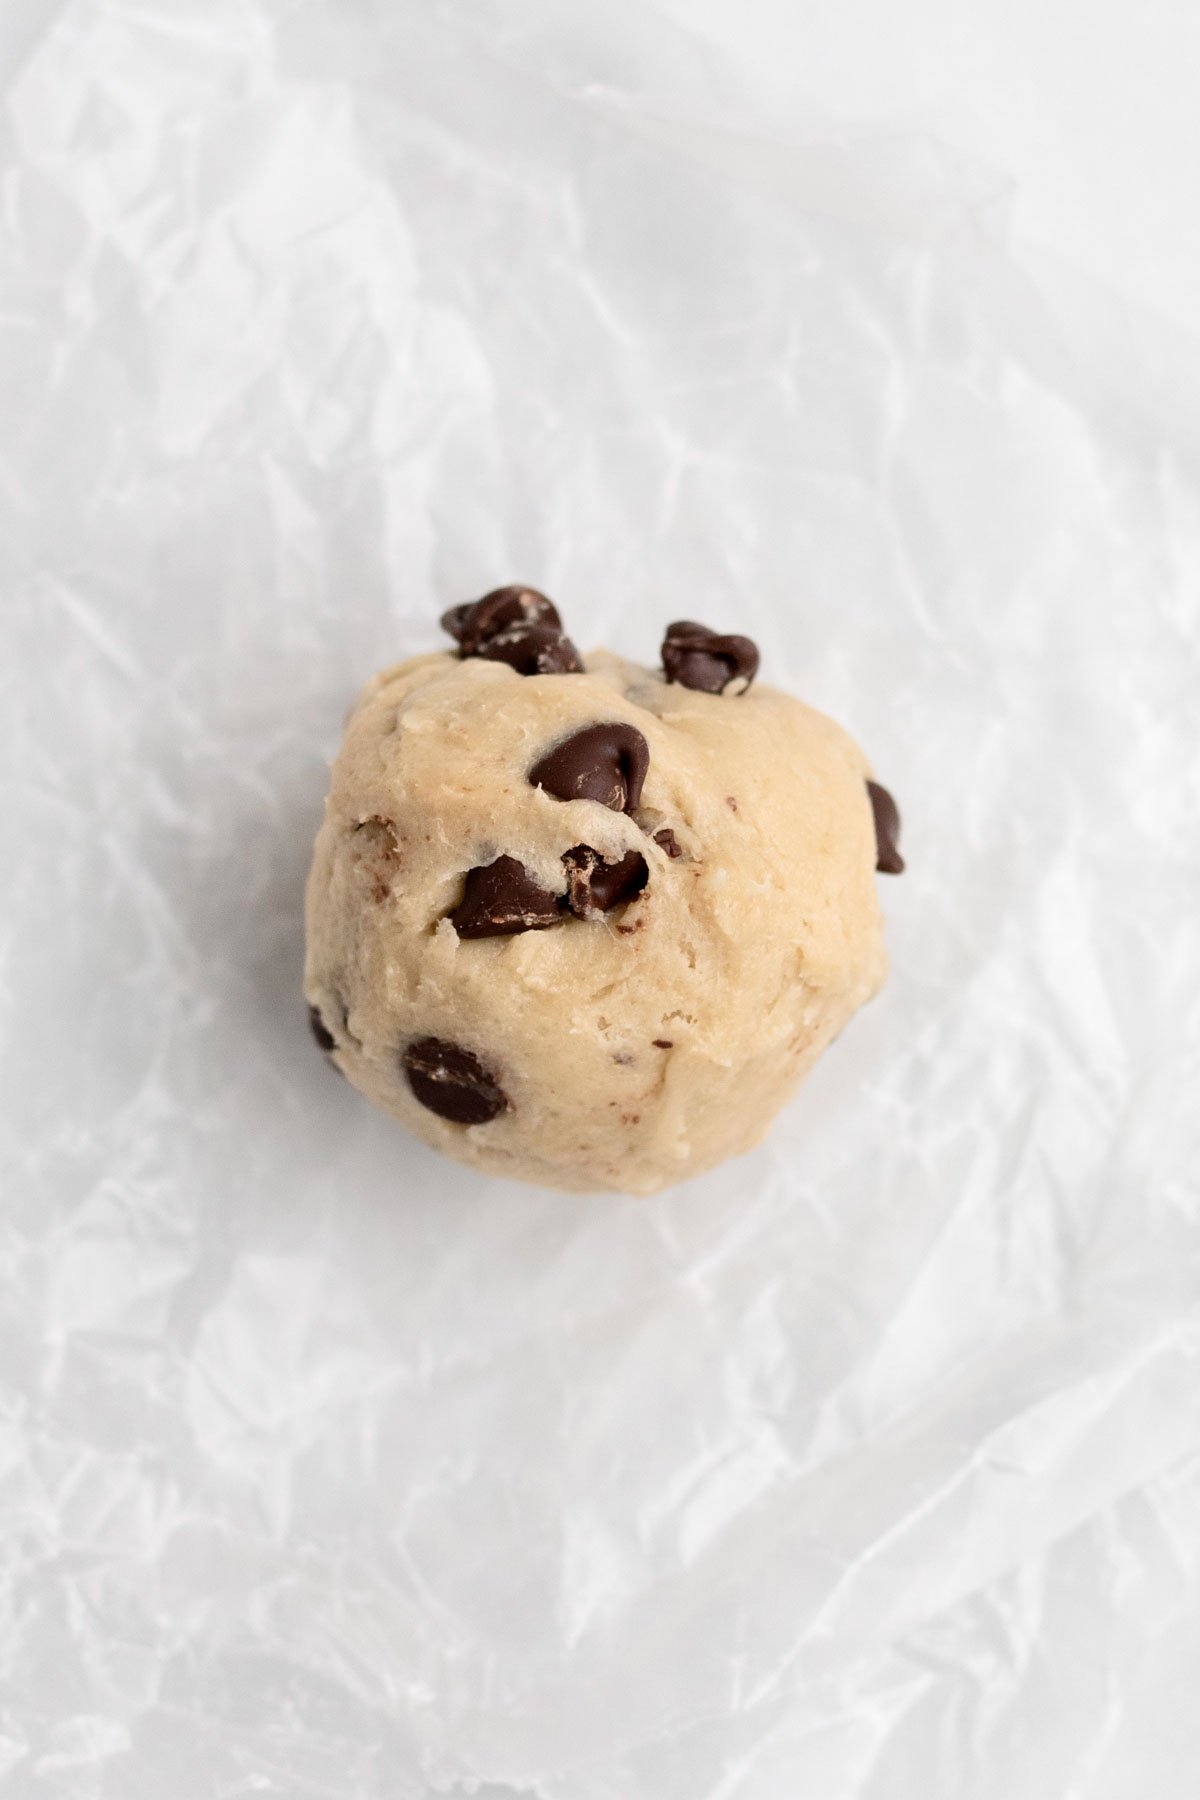 A scooped ball of cookie dough with chocolate chips.